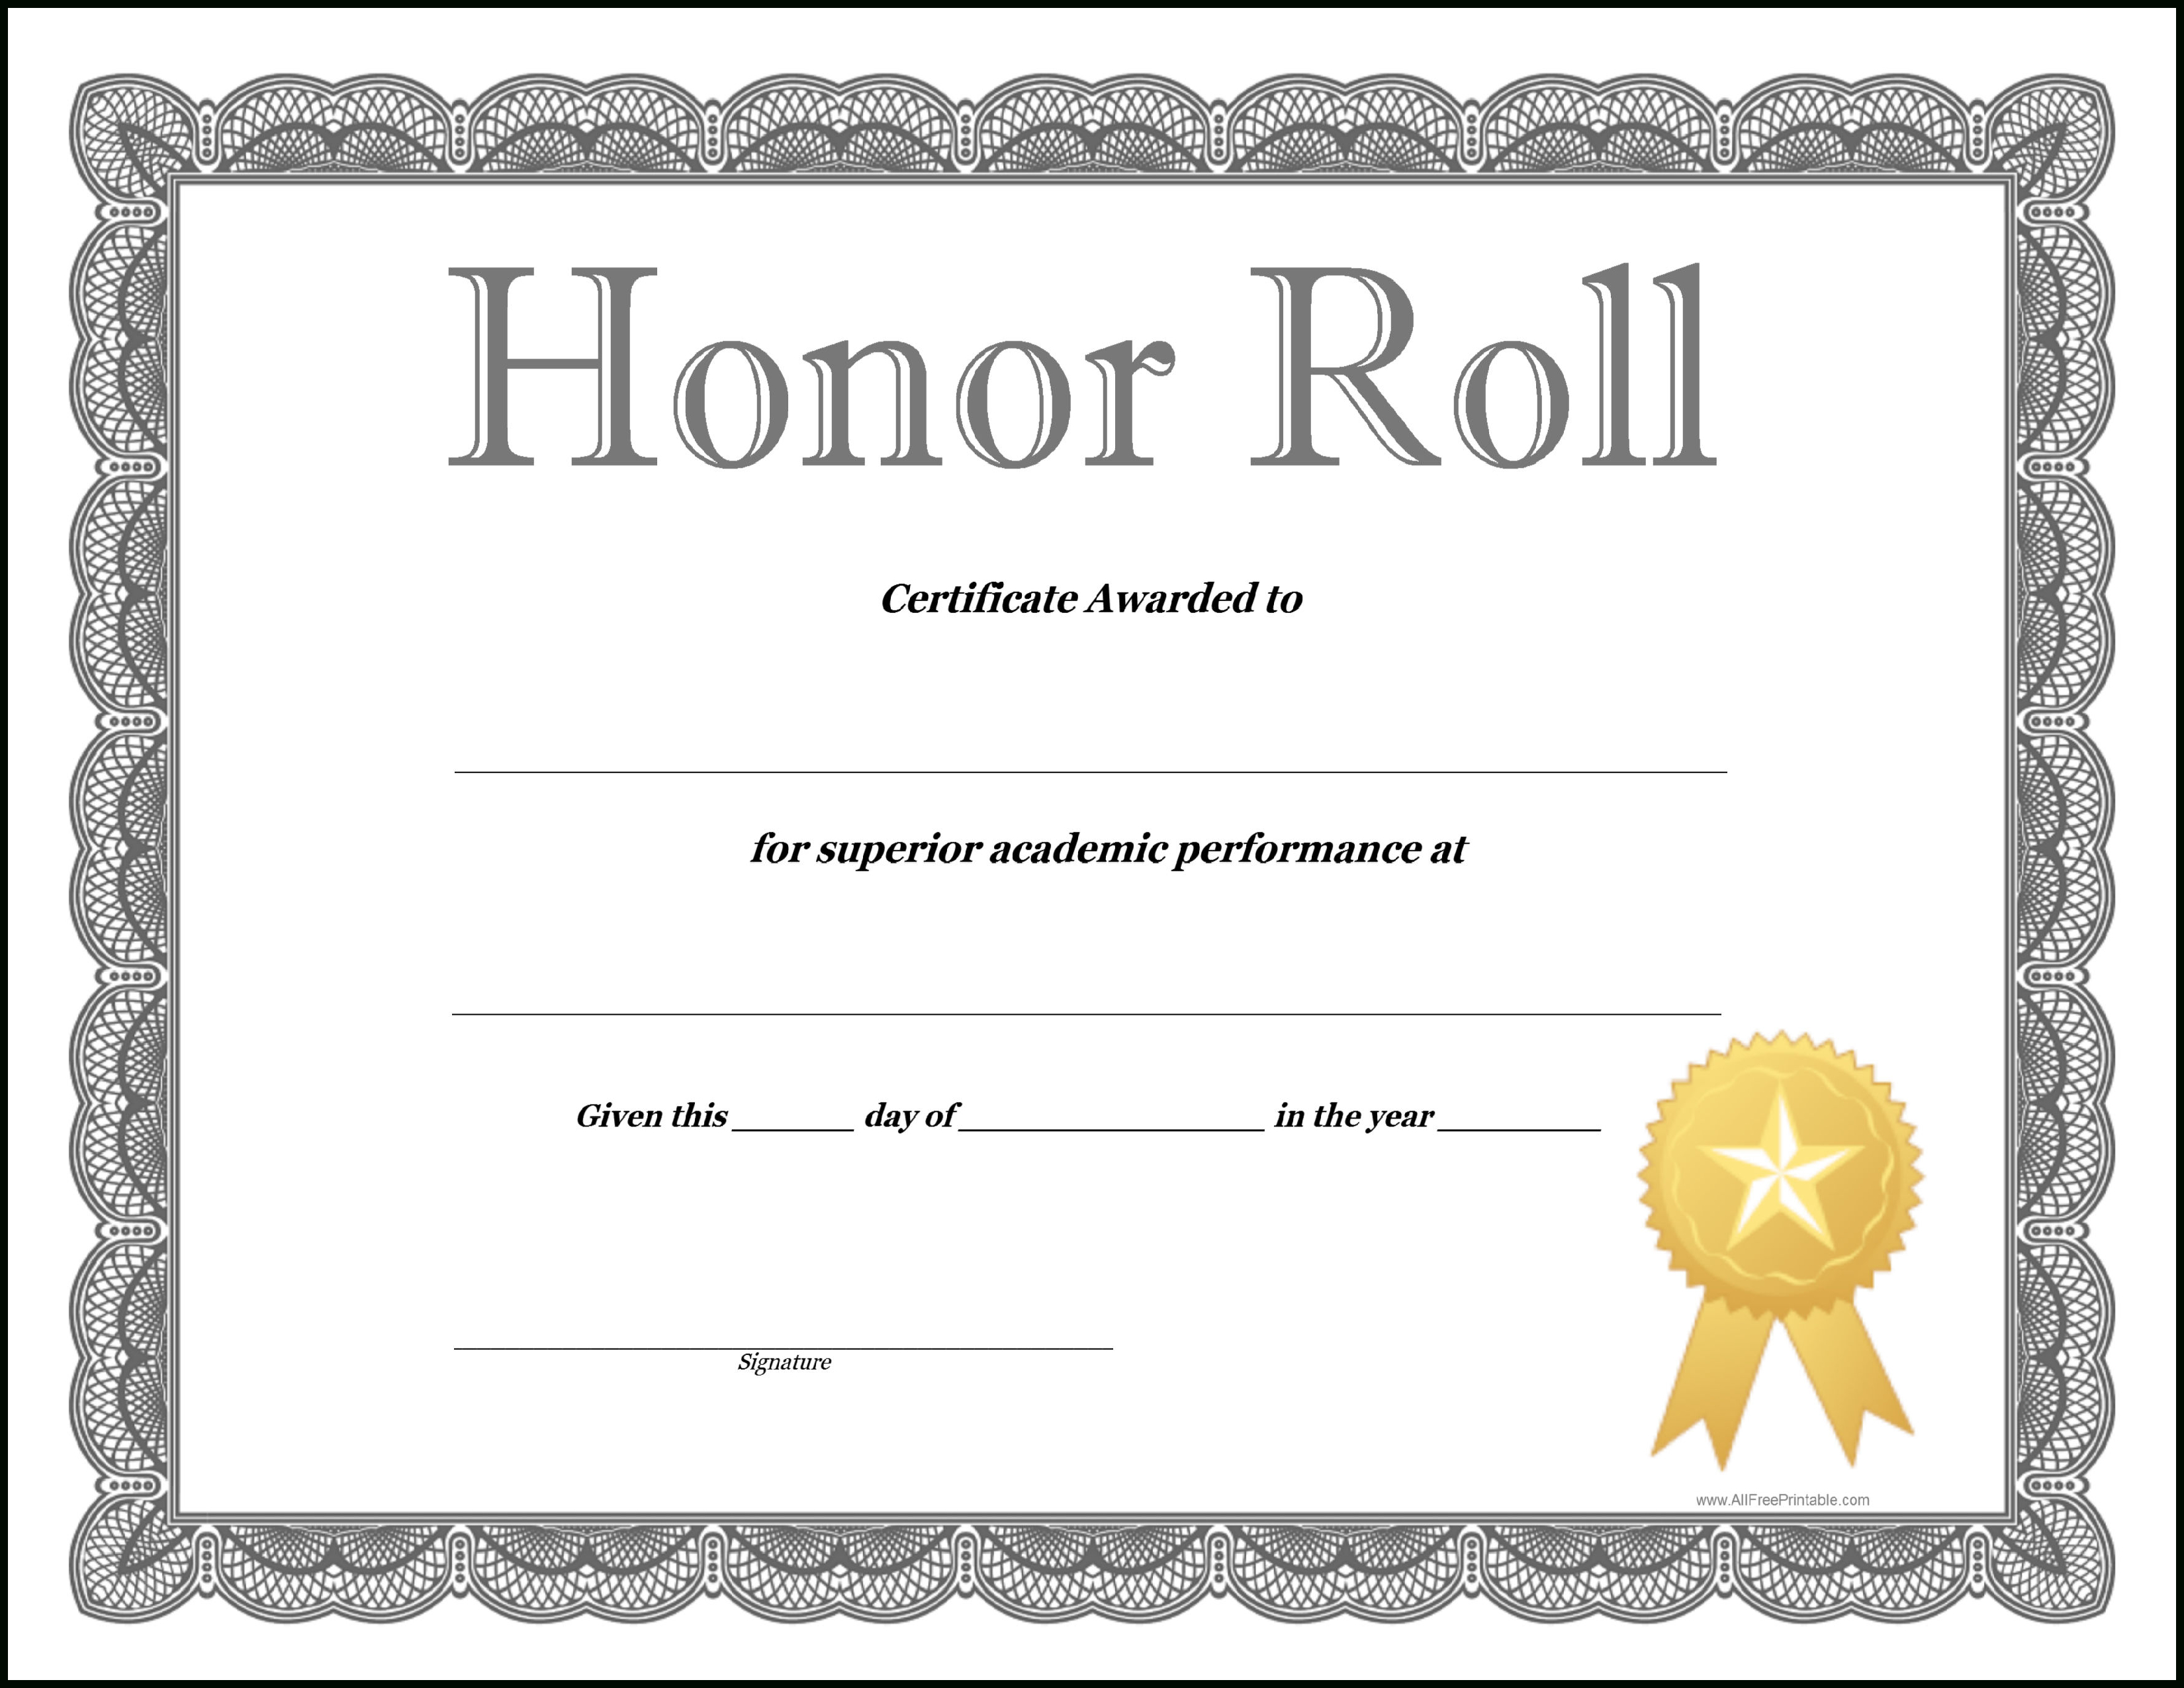 Honor Roll Certificate Template  How To Craft A Professional throughout Honor Roll Certificate Template